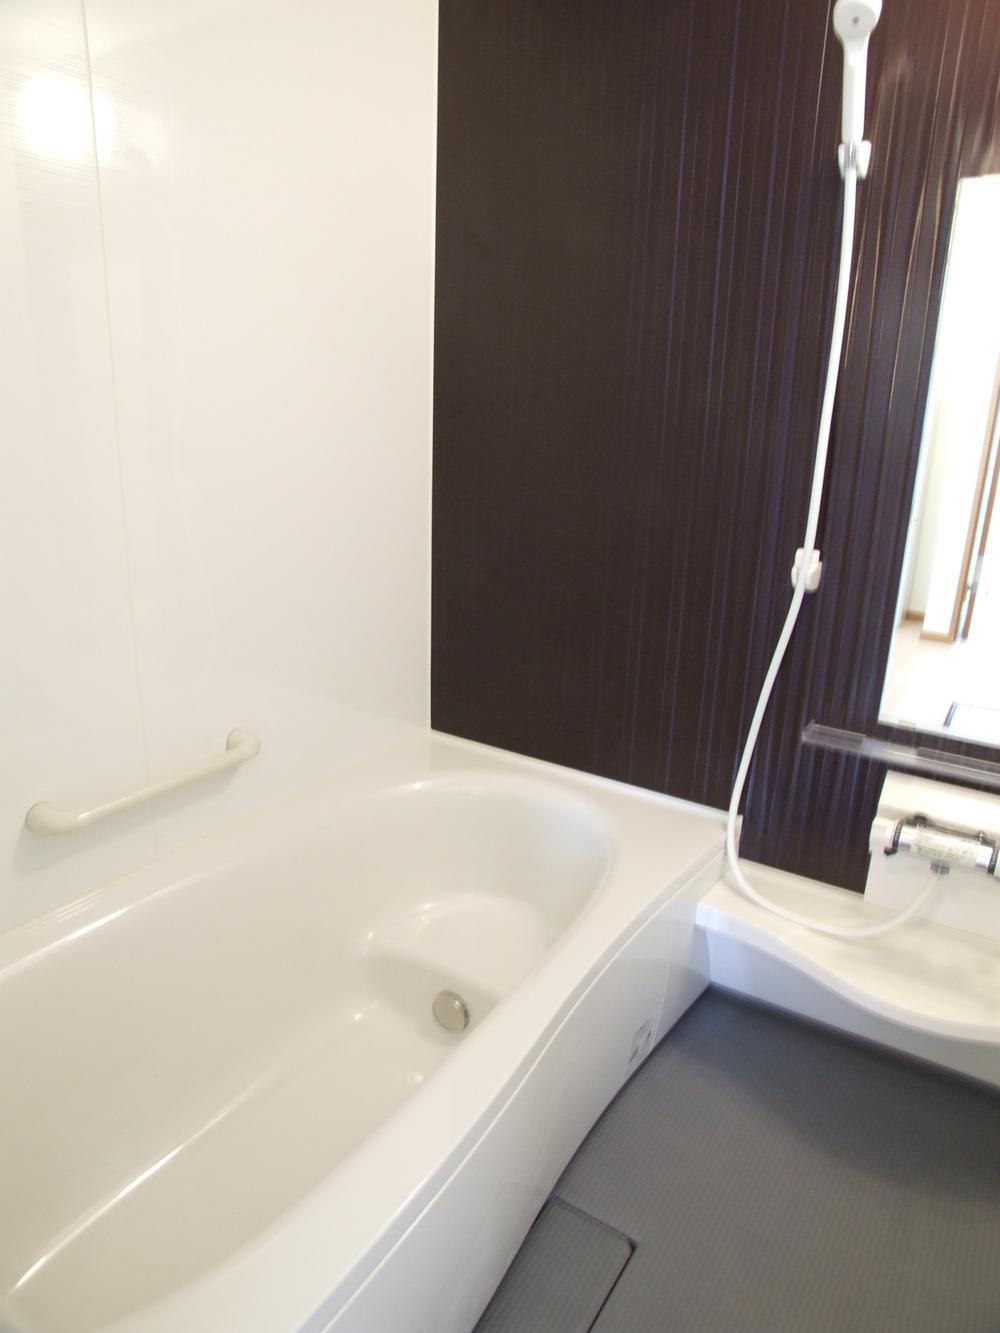 Bathroom. 1 square meters bathroom is spacious and bathing in parent and child. Convenient with reheating function